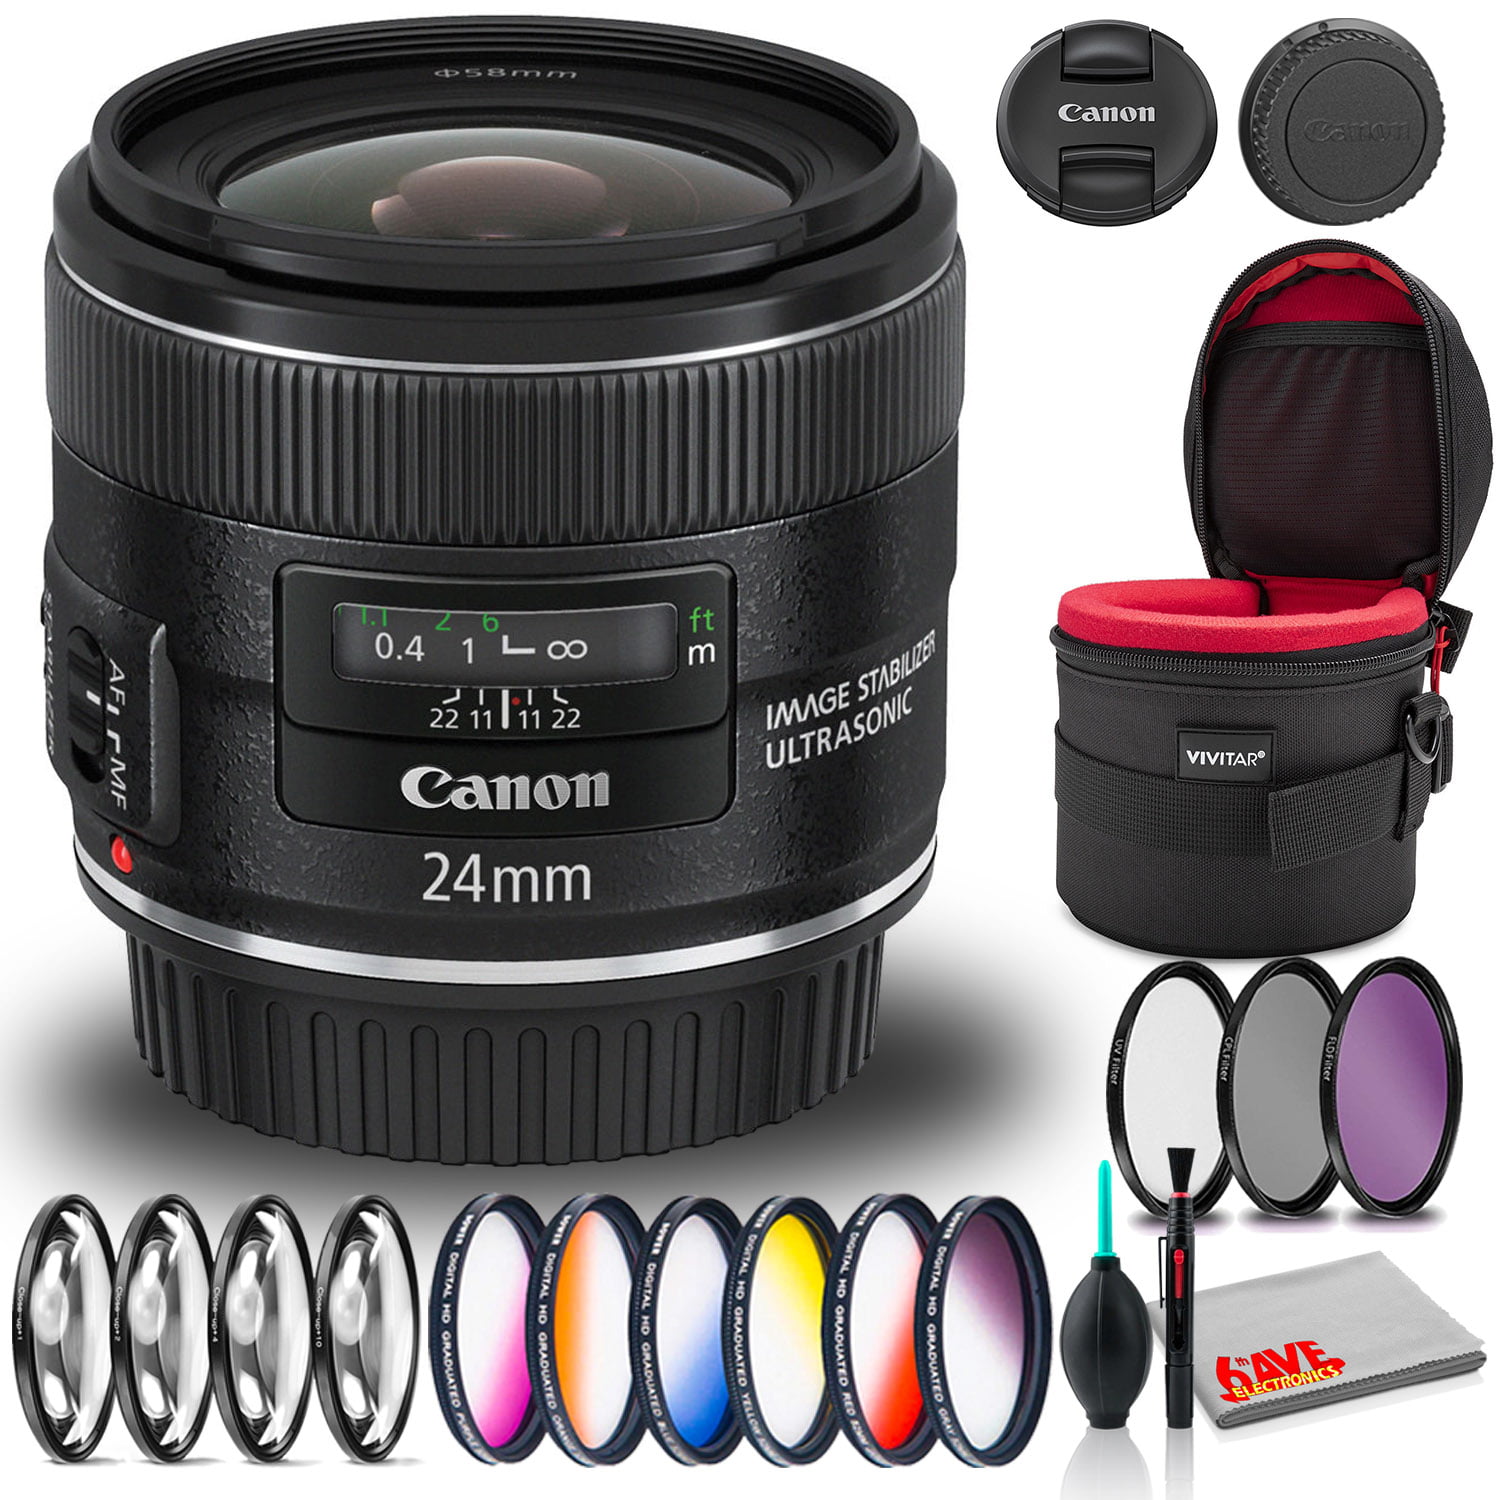 Xpix Cleaning Kit Xpix 2-in-1 Tripod Lens Pouch Canon EF-S 24mm f/2.8 STM Lens and Xpix Exclusive Bundle w/Remote Filters